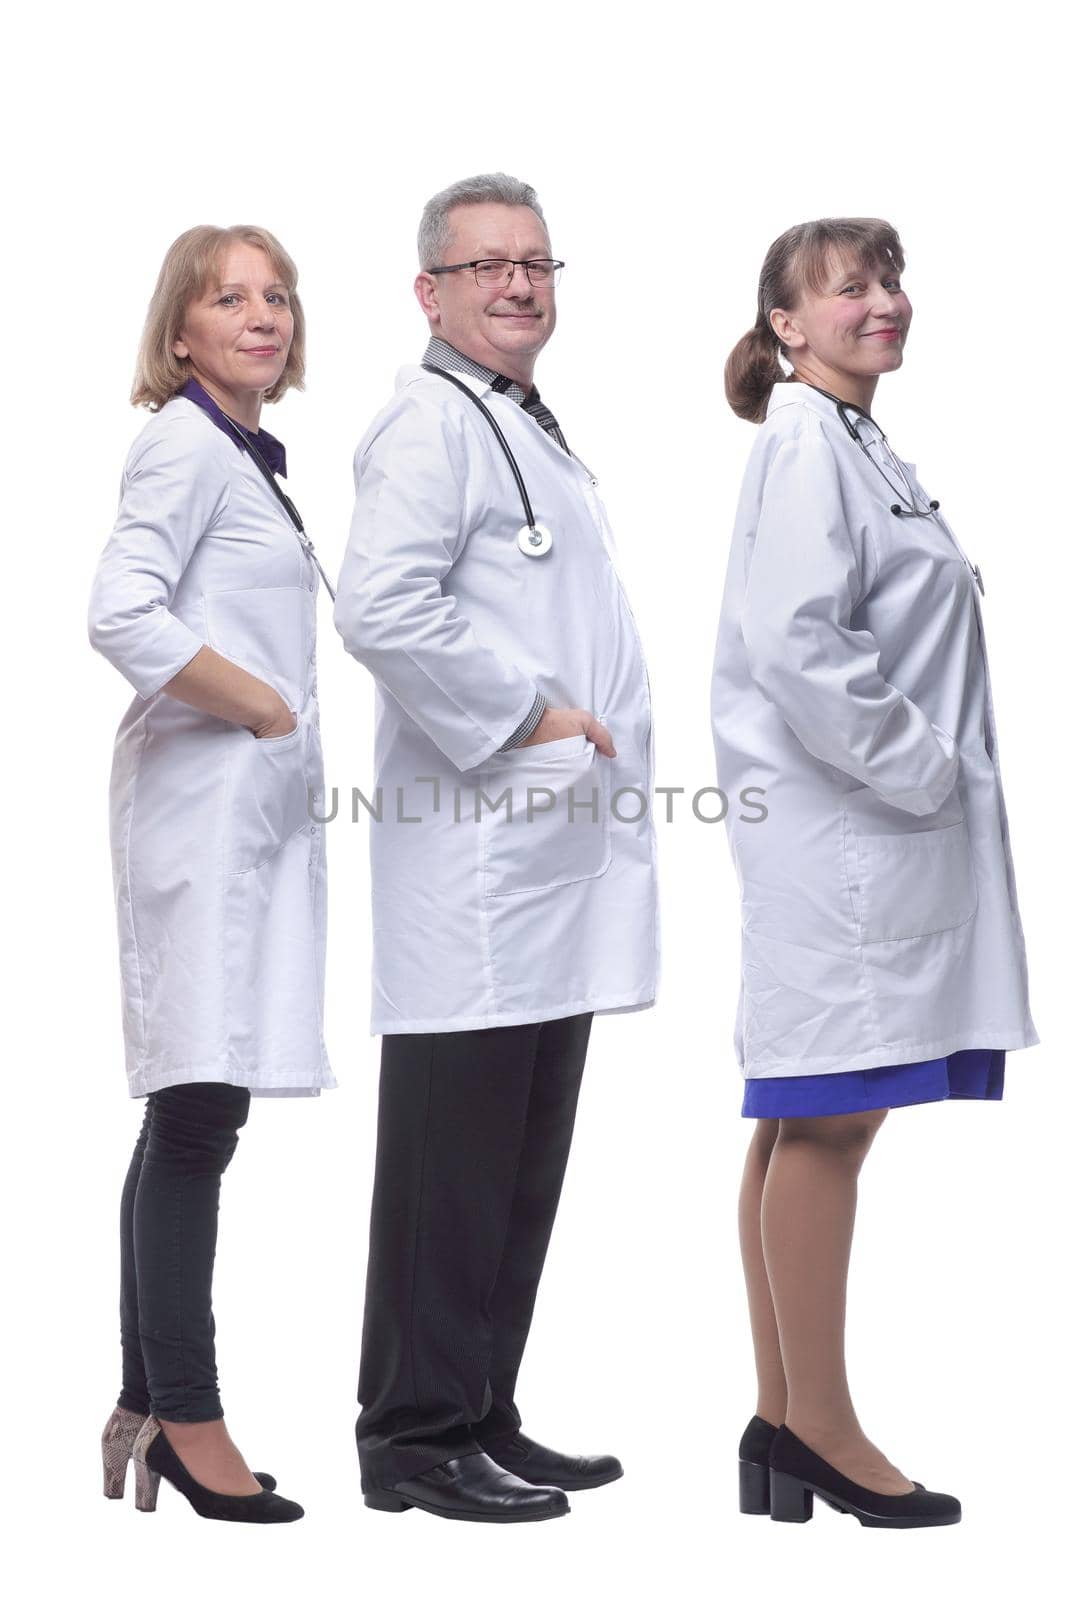 Profile of group of smiling hospital colleagues standing together with arms crossed